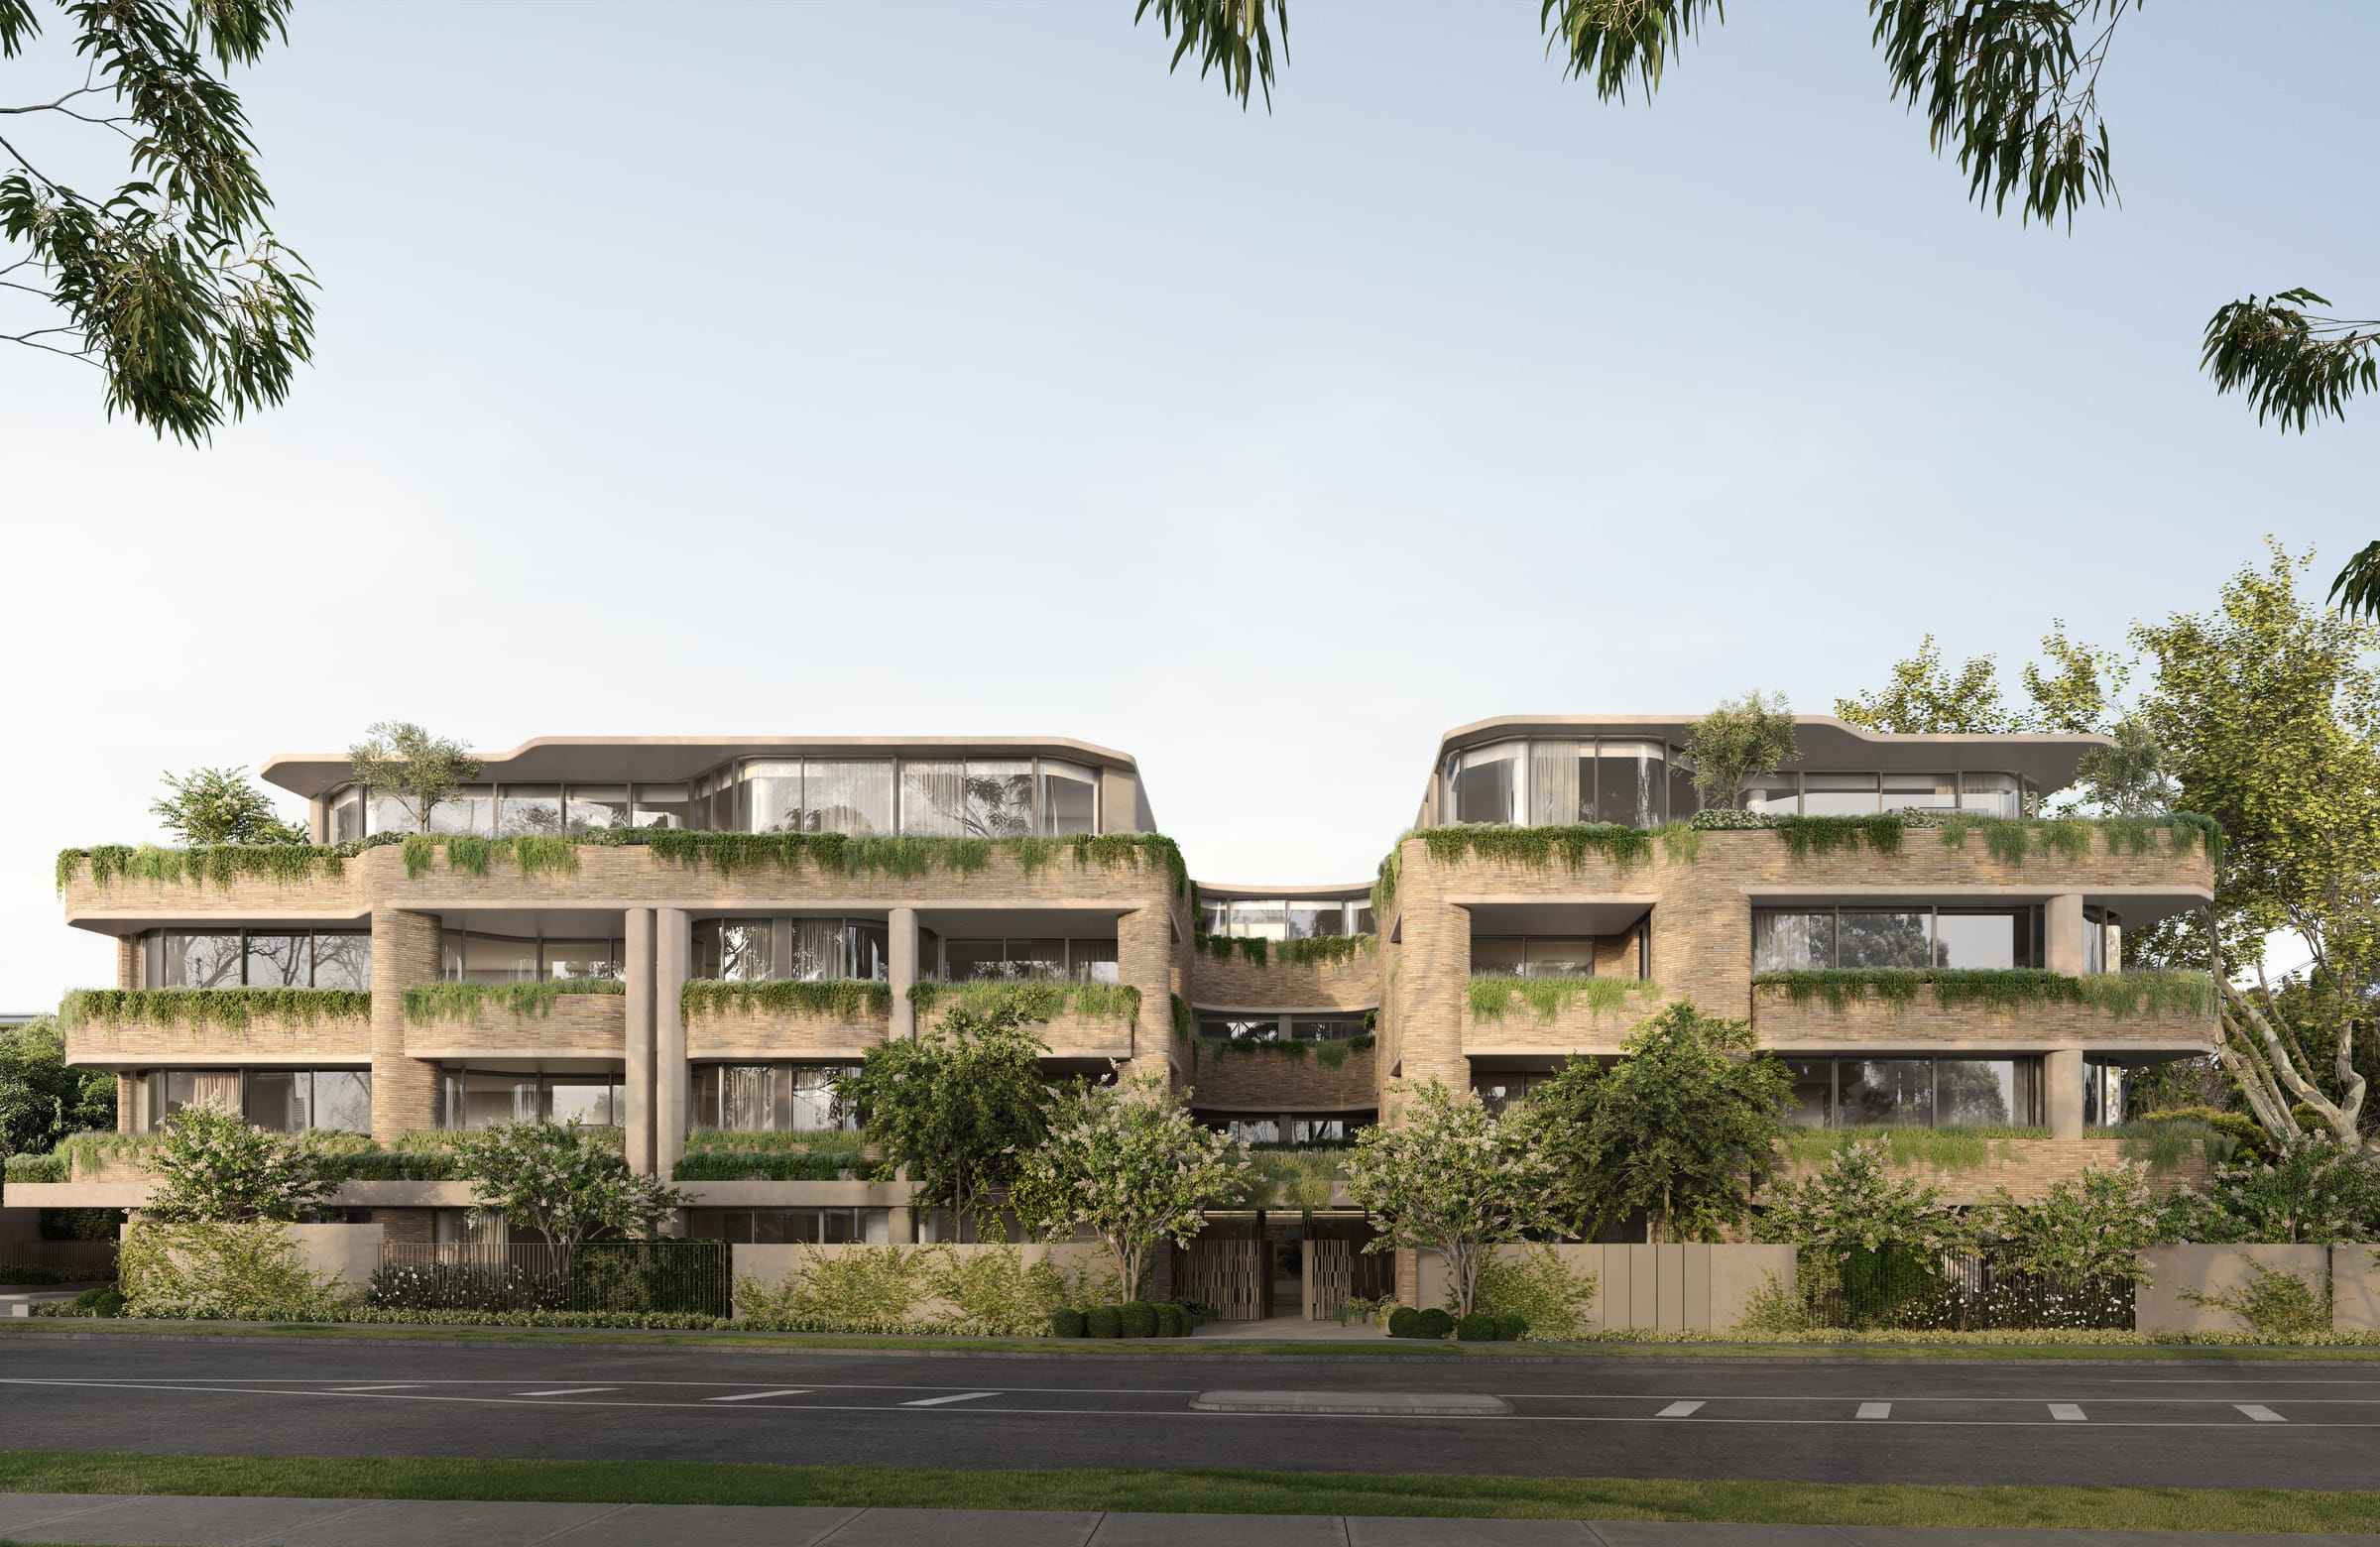 Como, Toorak by Prime Edition.Exterior view of a modern residential complex with multiple levels. The architecture incorporates organic elements, with greenery draping over the balconies of each unit. The building is structured with clean lines and rectangular forms, offering a harmonious blend with the natural surroundings.